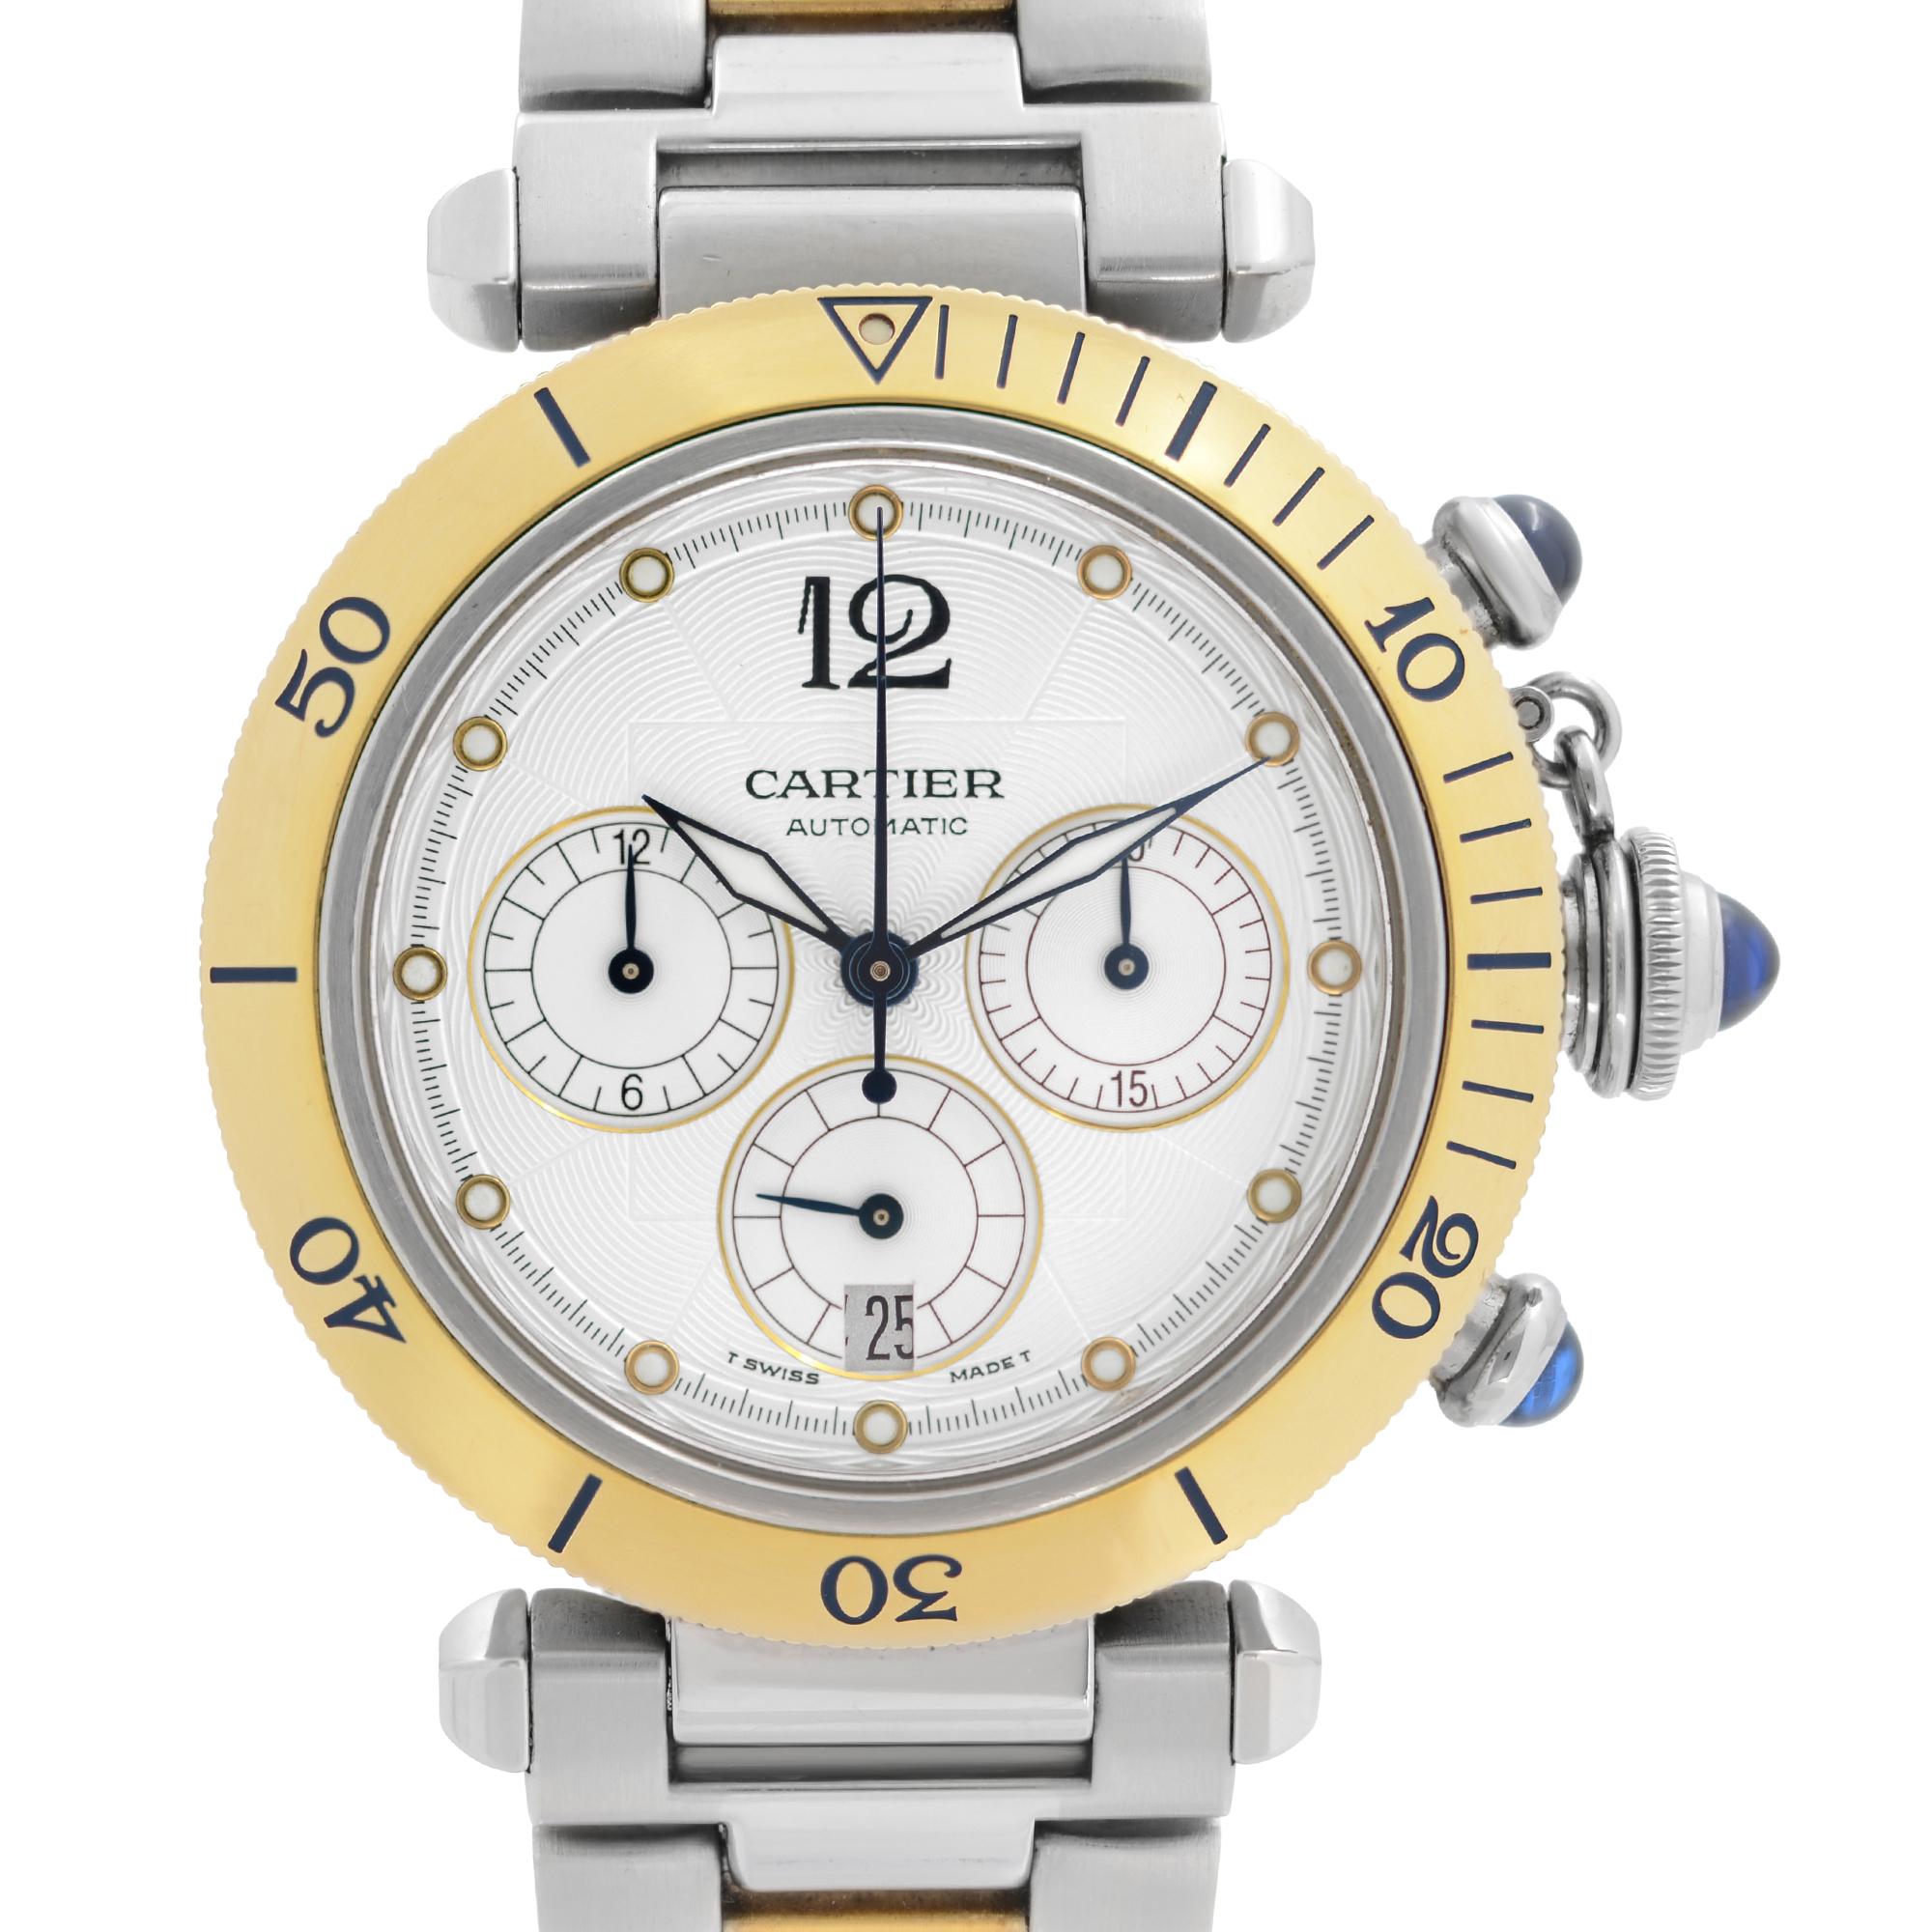 Pre Owned Cartier Pasha Stainless Steel Gold Chronograph Silver Dial Men's Watch W31036T6 This Beautiful Timepiece Features: Stainless Steel Case with a Stainless Steel and 18k Gold Bracelet, Unidirectional 18k Gold Bezel, Silver Dial with Luminous